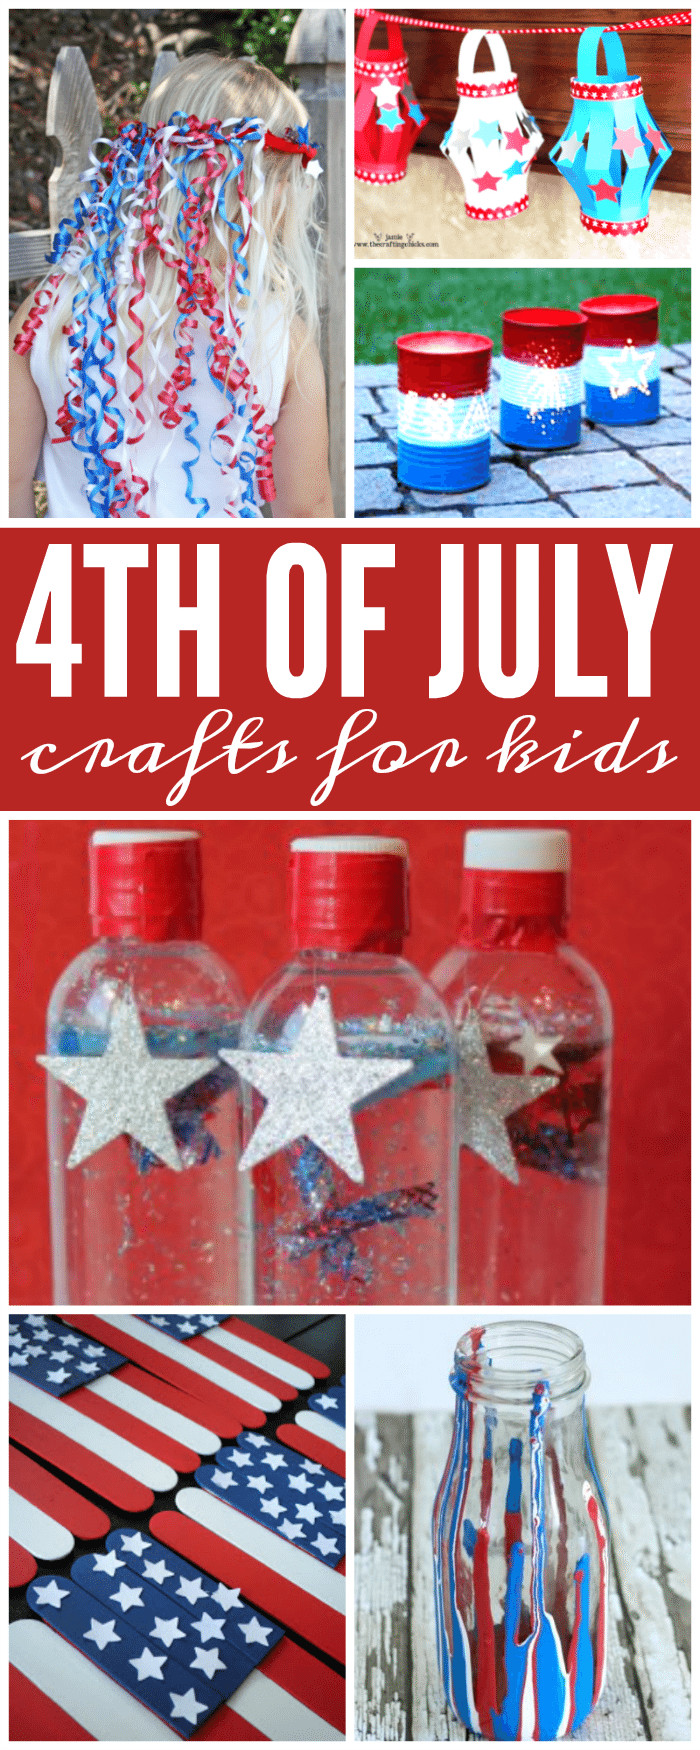 4th Of July Crafts
 4th of July Crafts for Kids